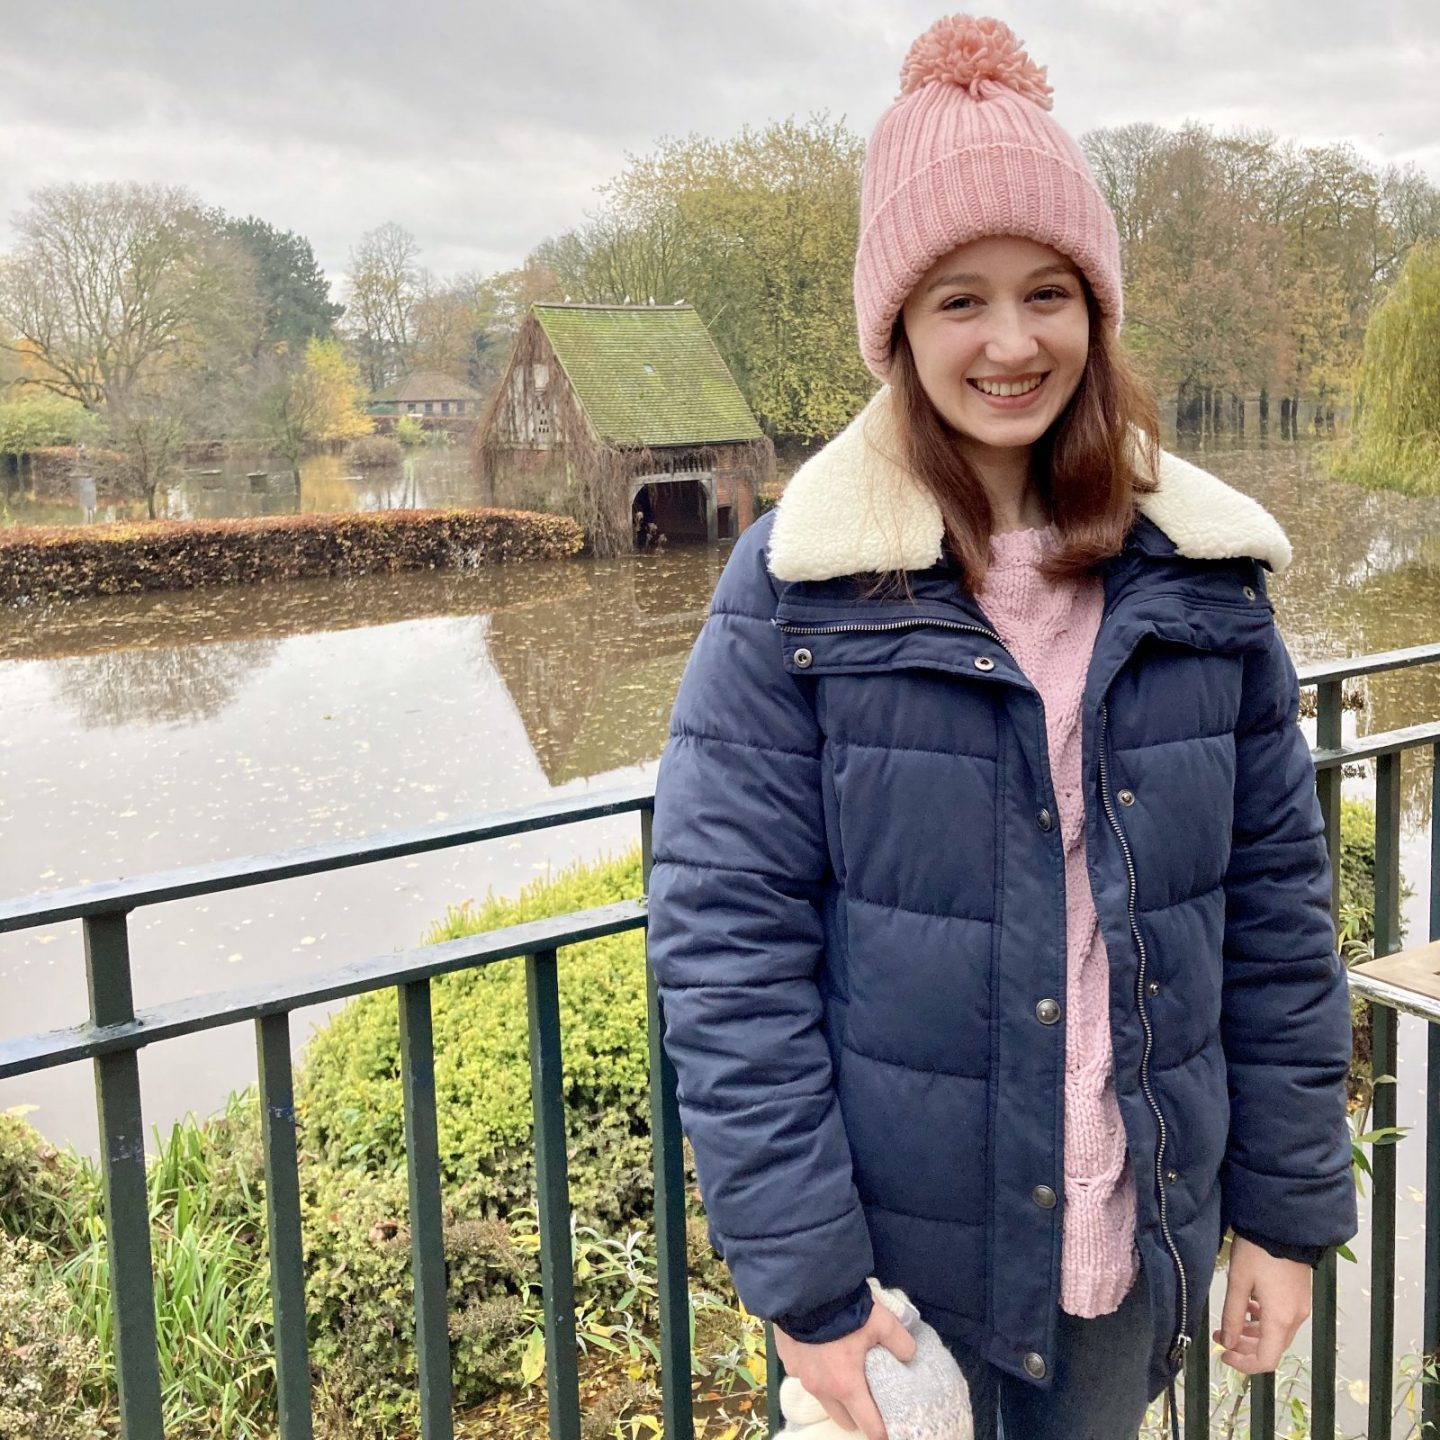 Pippa stood outdoors and smiling, wearing navy blue winter coat, lilac jumper and pale pink bobble hat. Park visible in back (rather flooded with water at the time!)